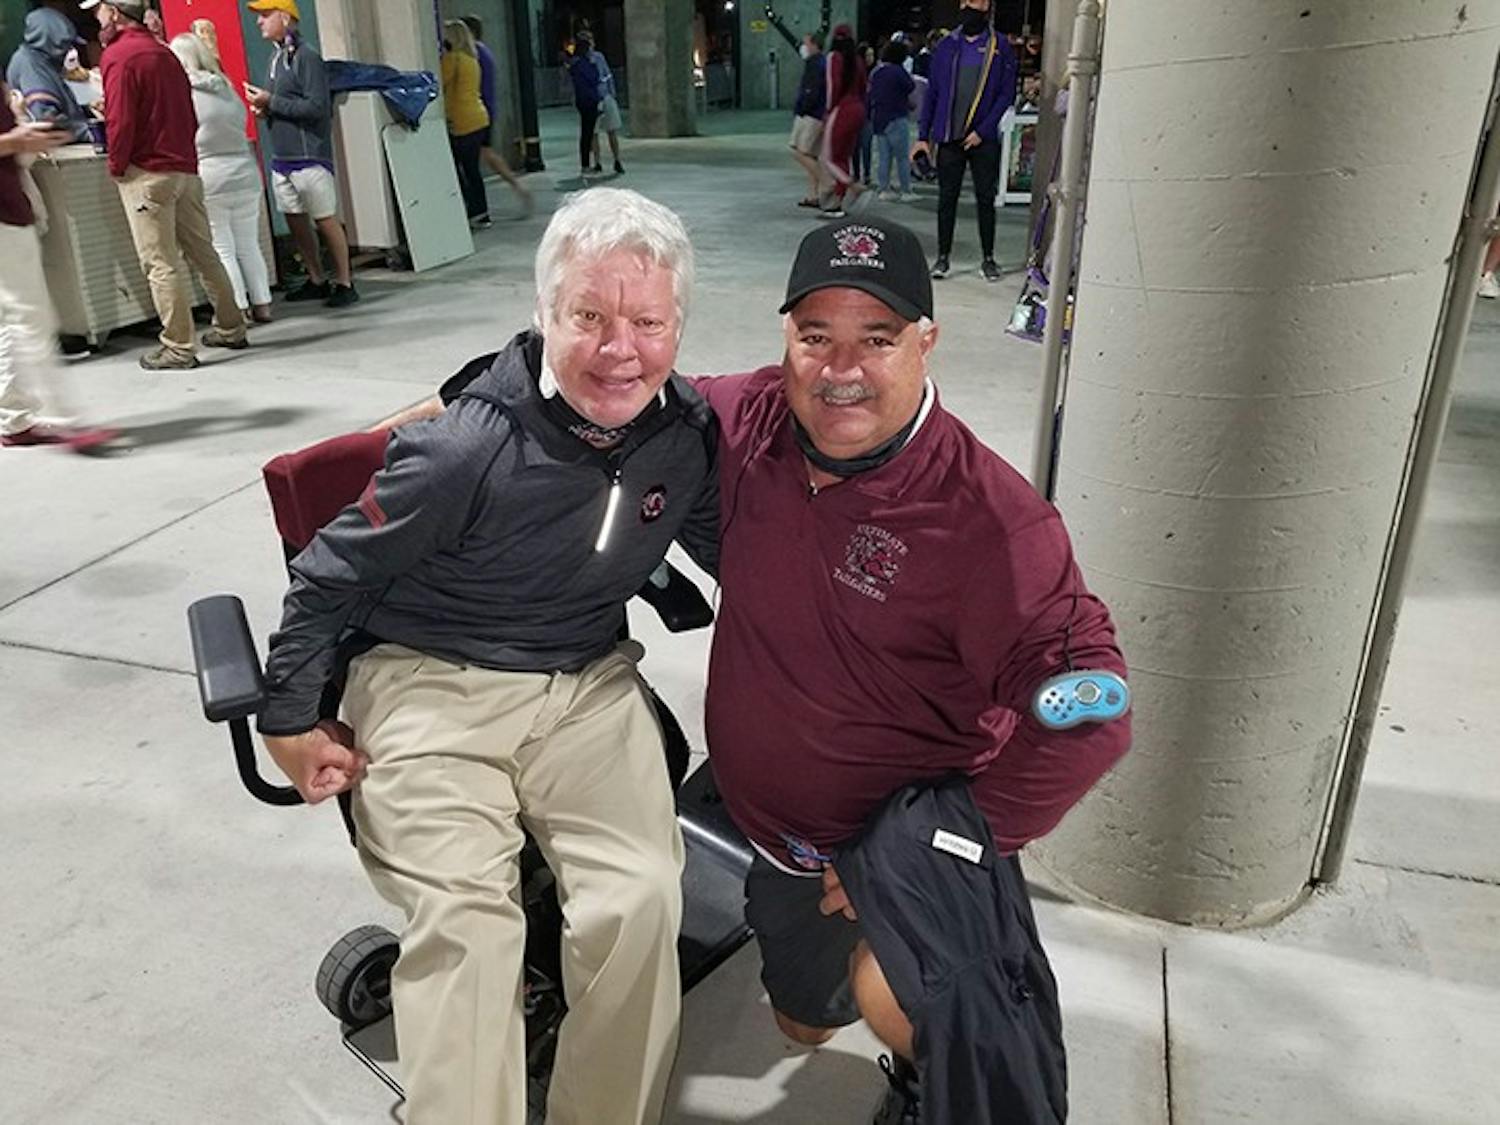 Kirk Hollingsworth (left) and Chris Fulmer (right) take a picture together at a Gamecock football game. The duo have been attending games religiously since they were kids.